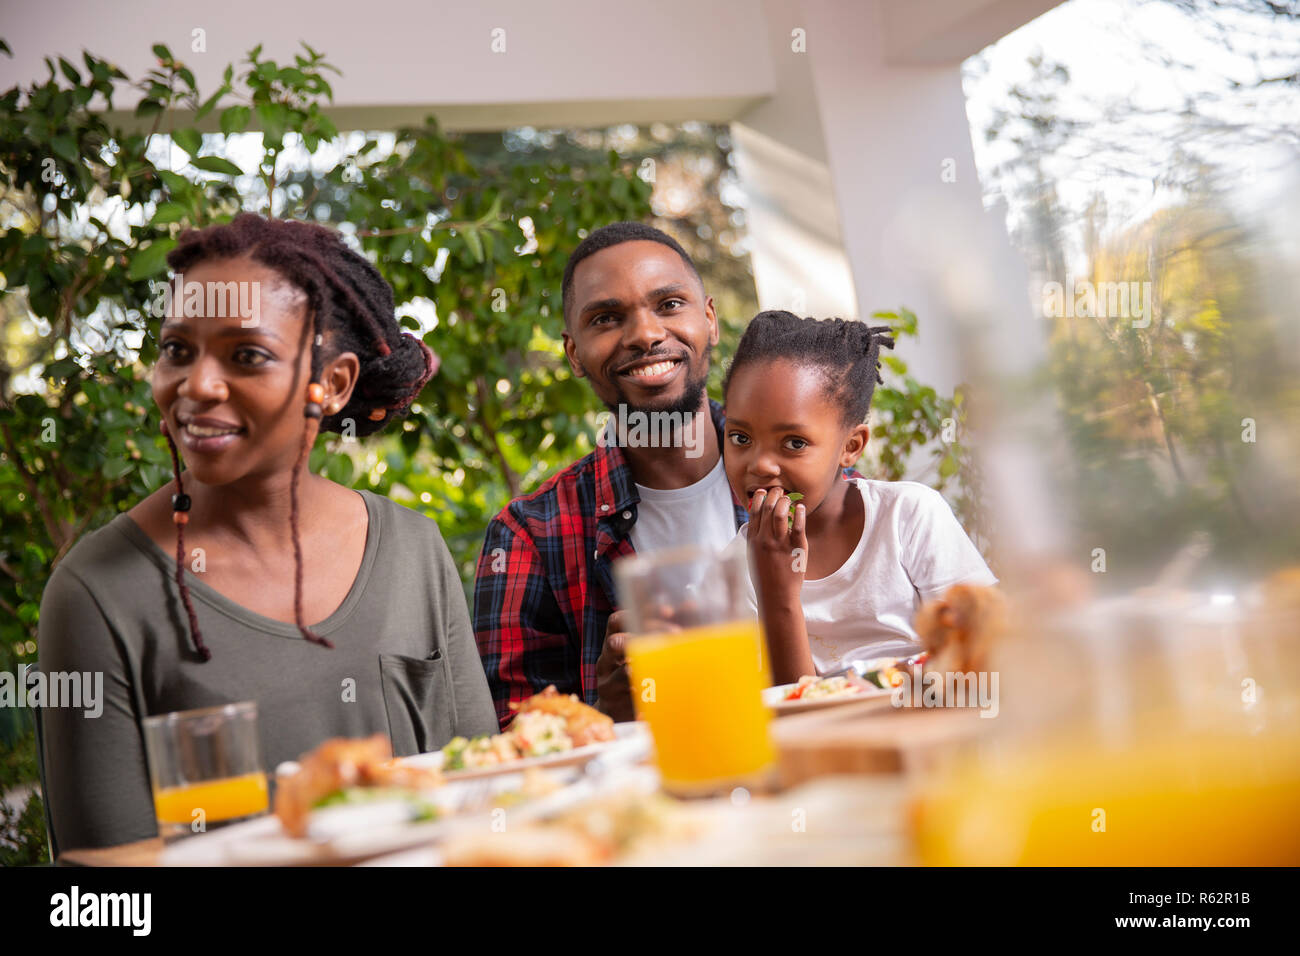 A family eating together around the table Stock Photo